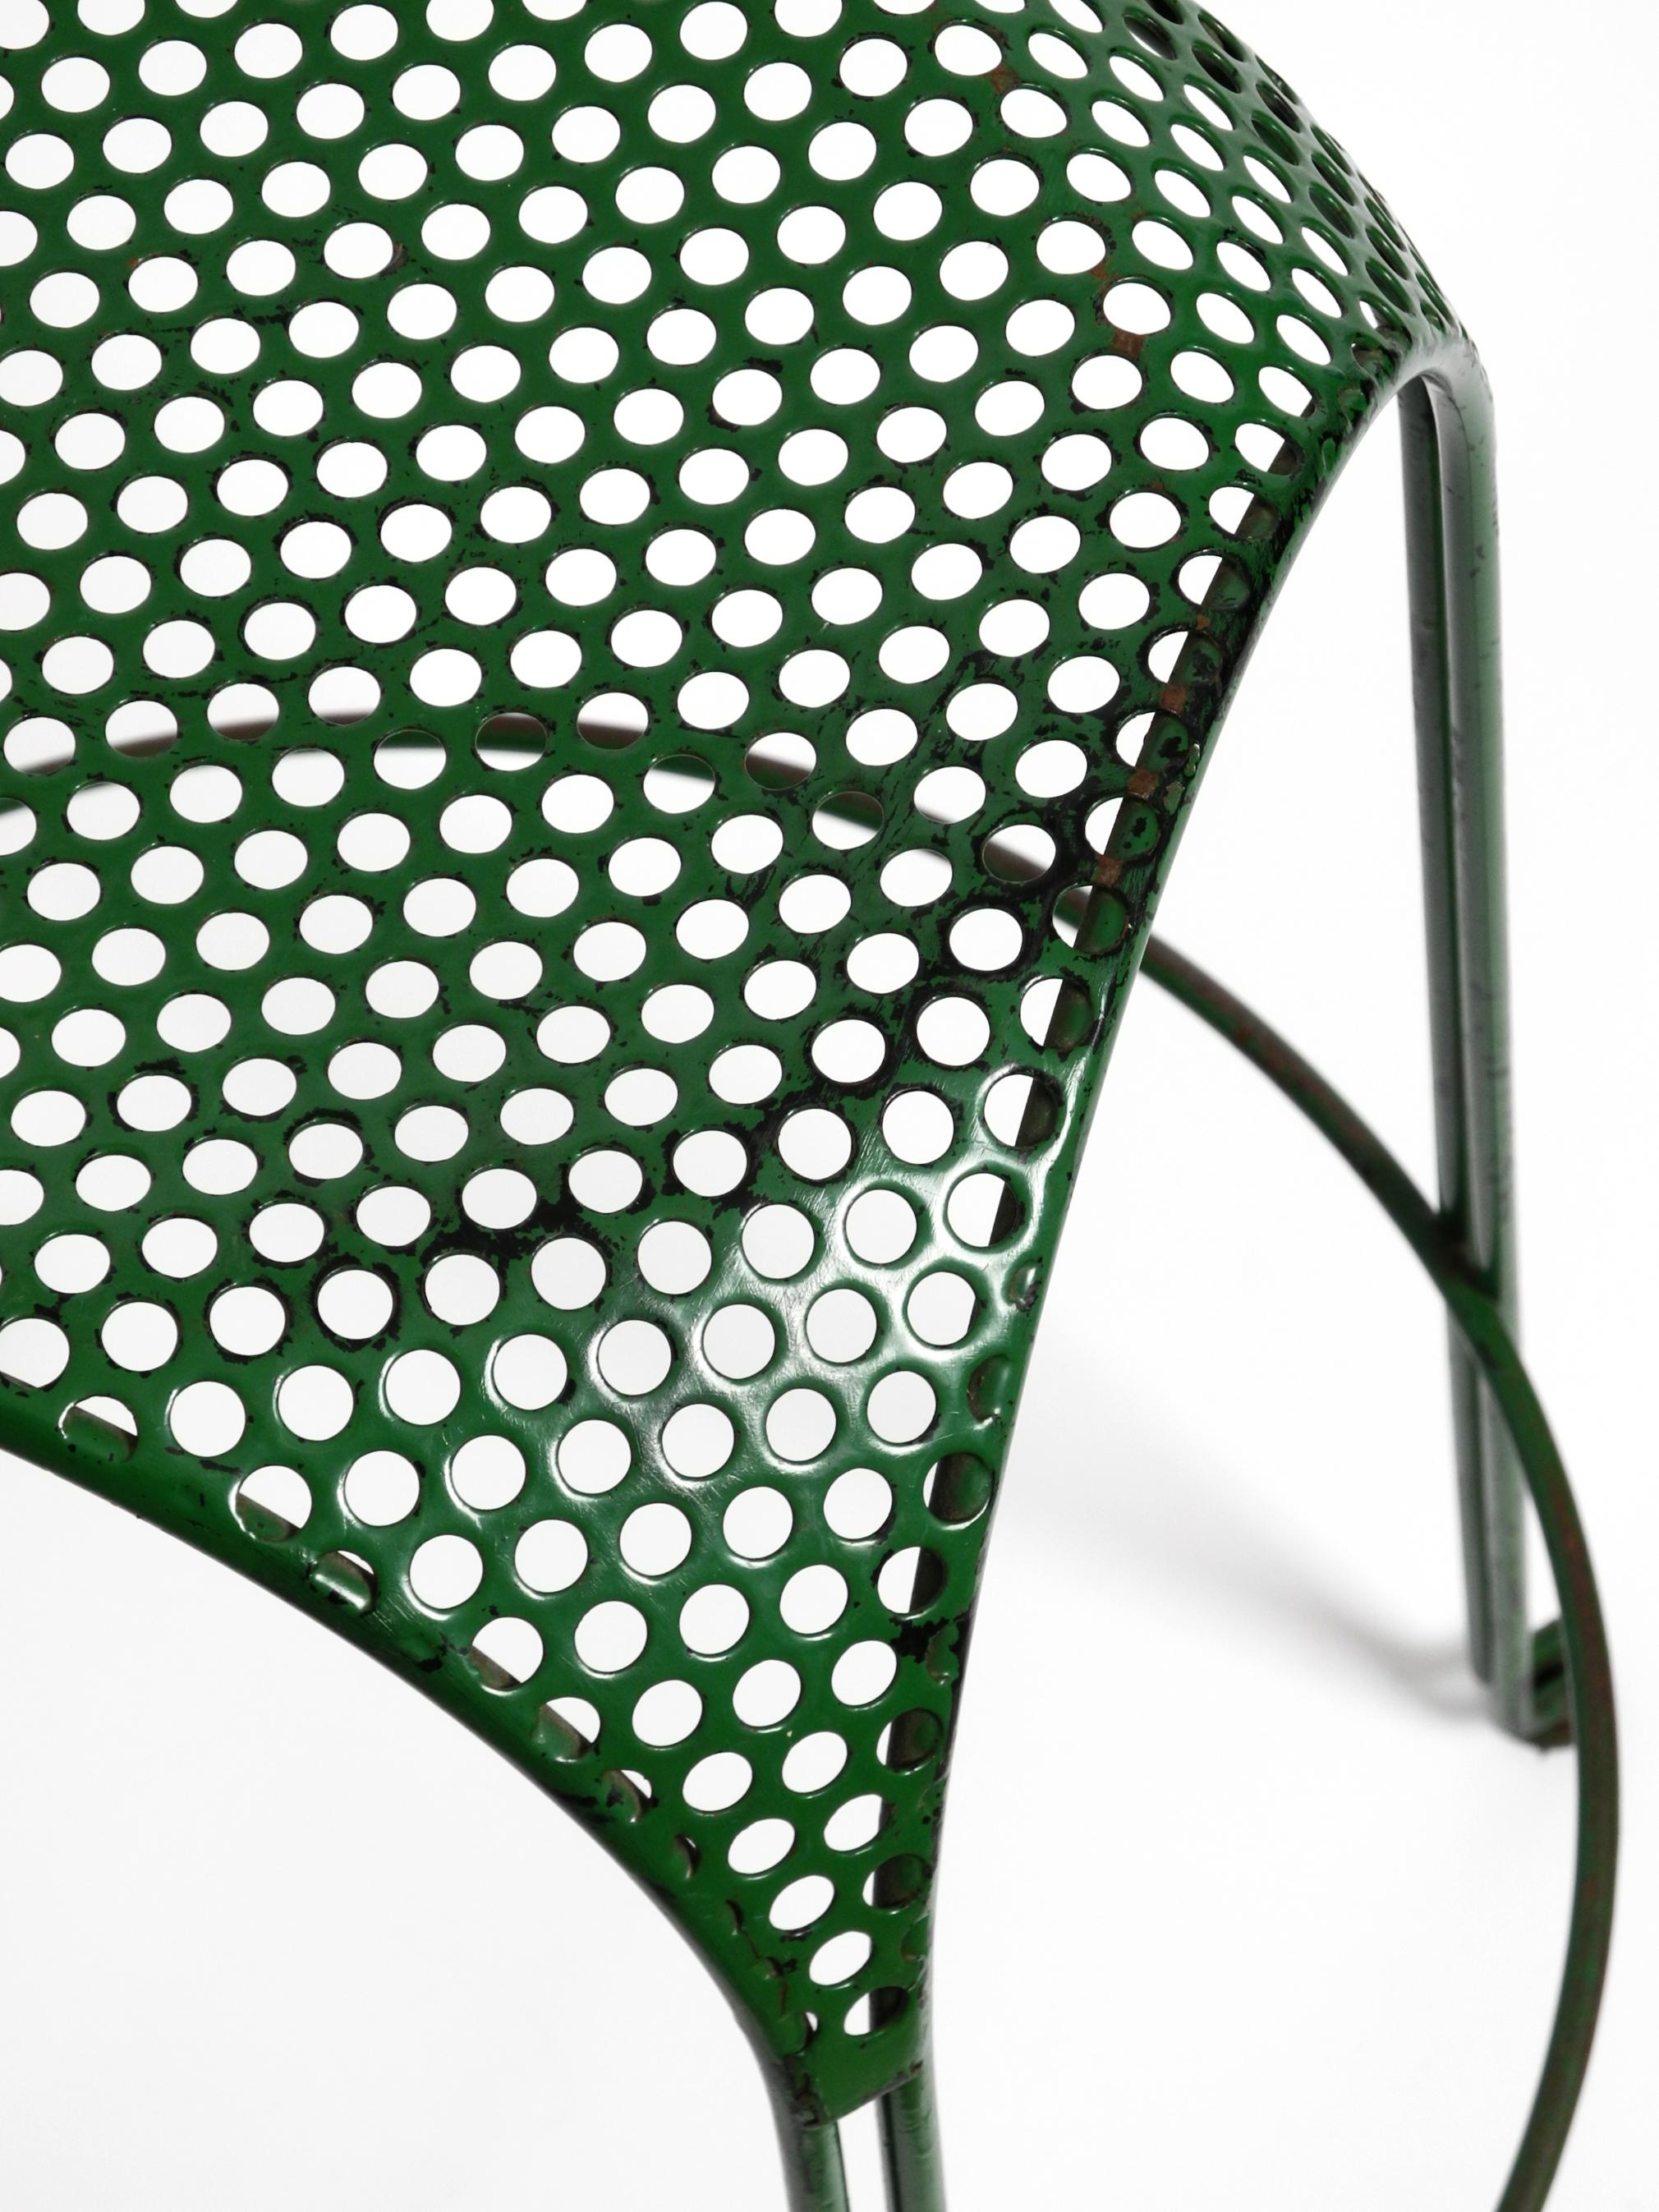 Italian 1960s bar stool made of green painted metal with perforated metal seat For Sale 9